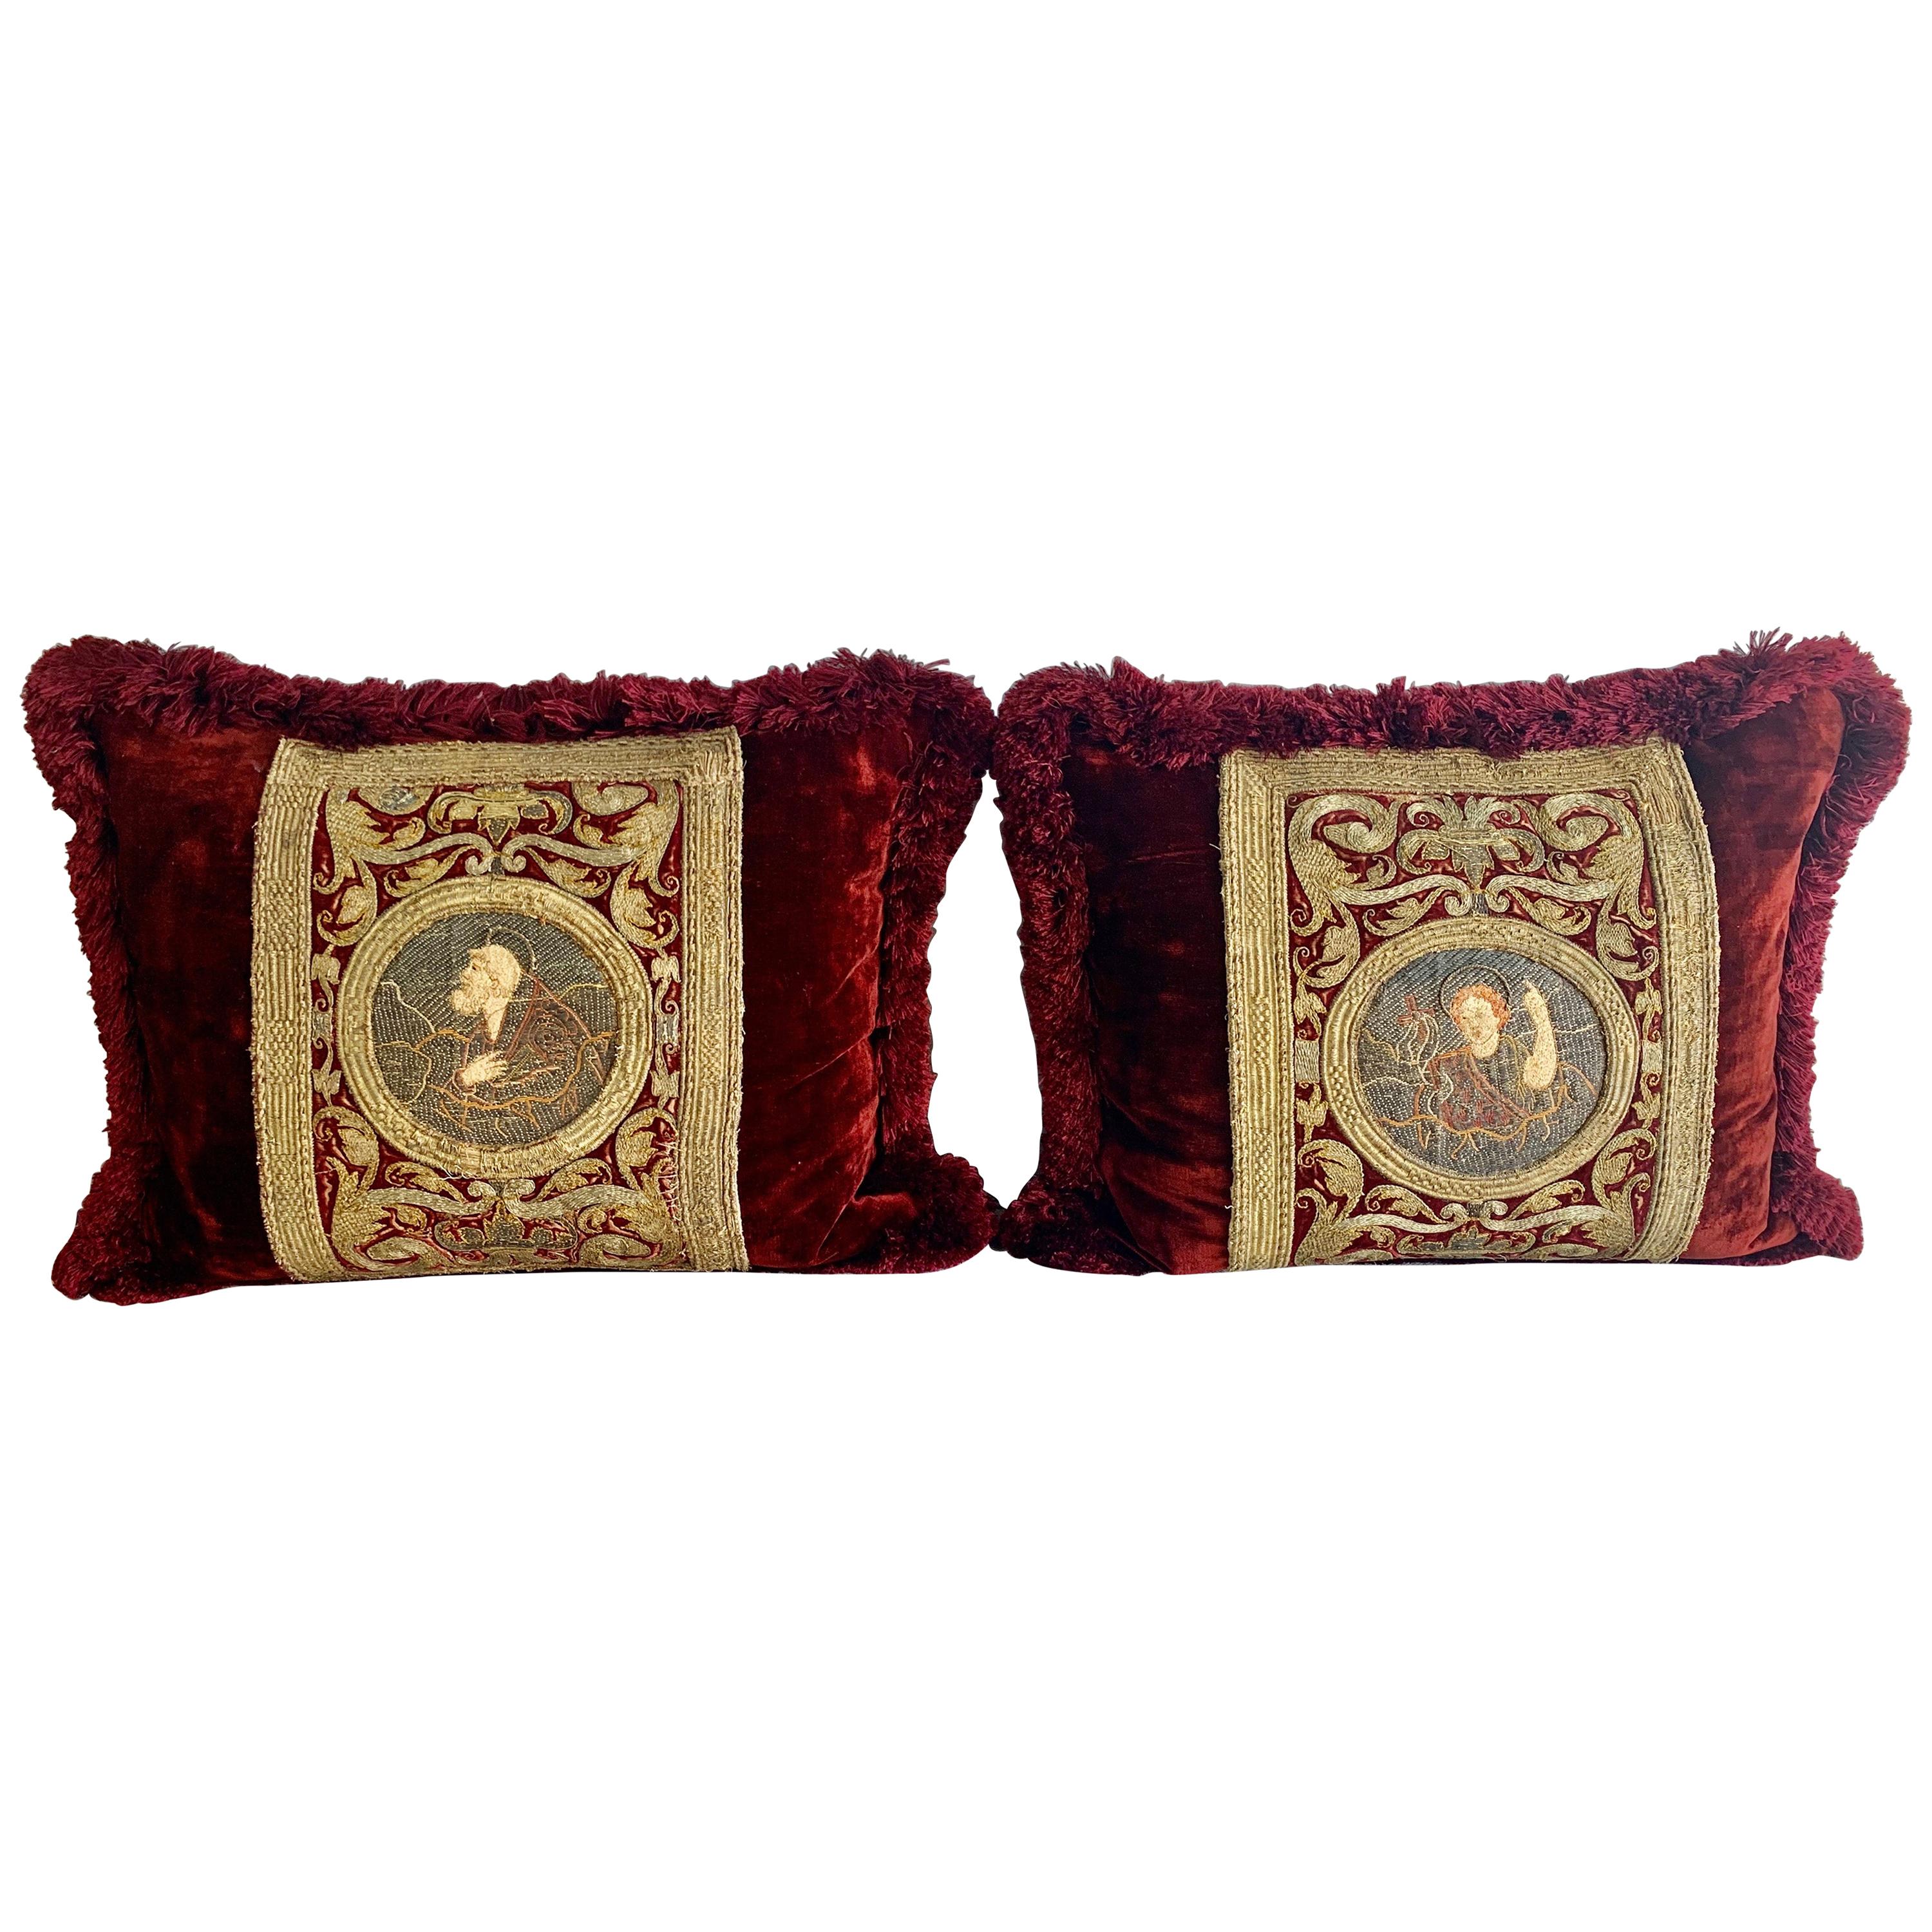 Pair of 18th Century Metallic Embroidered Red Velvet Pillows